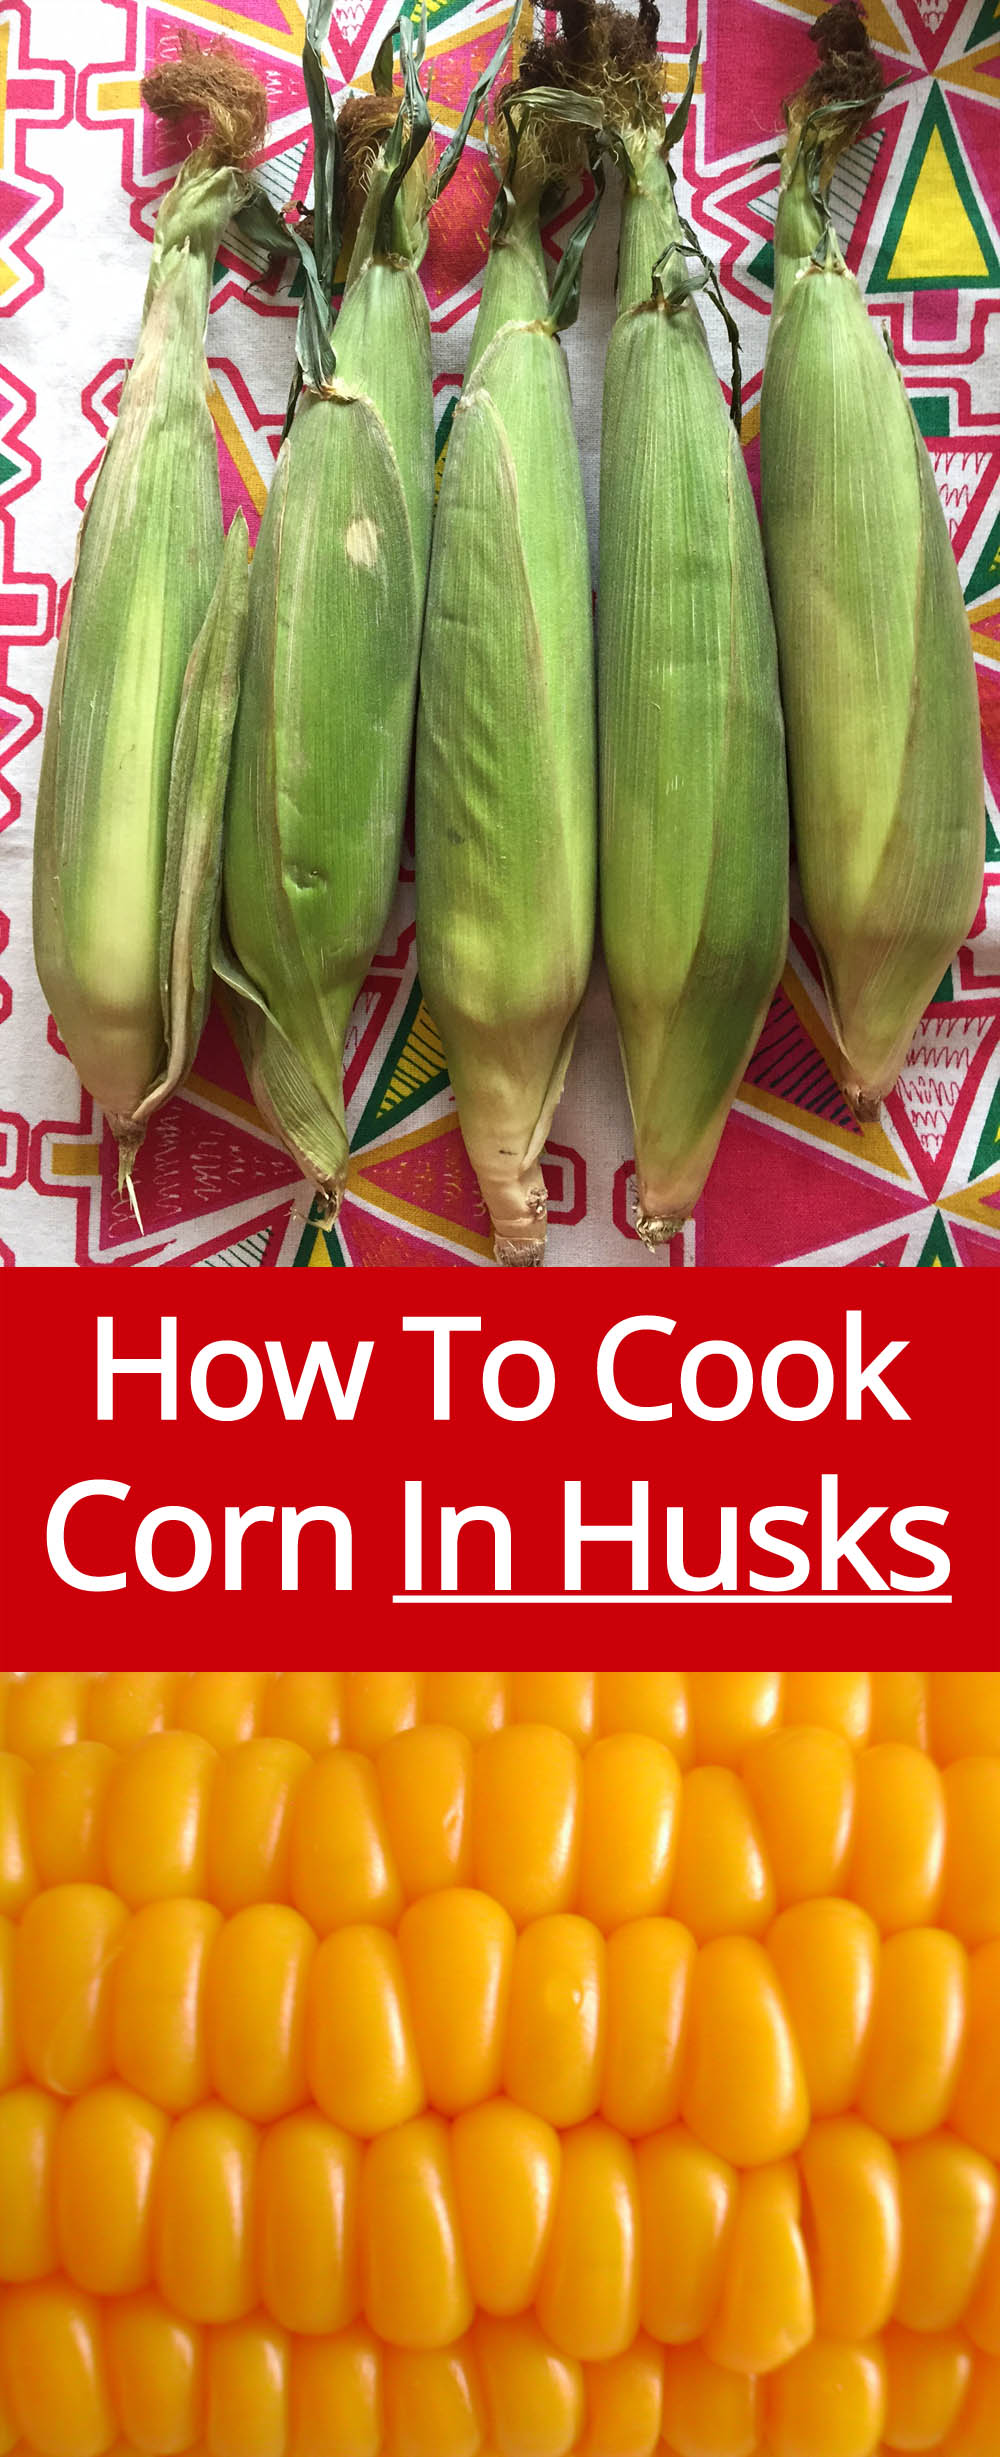 How To Cook Corn In The Husks - The Easiest Method Of Cooking Corn On The Cob!